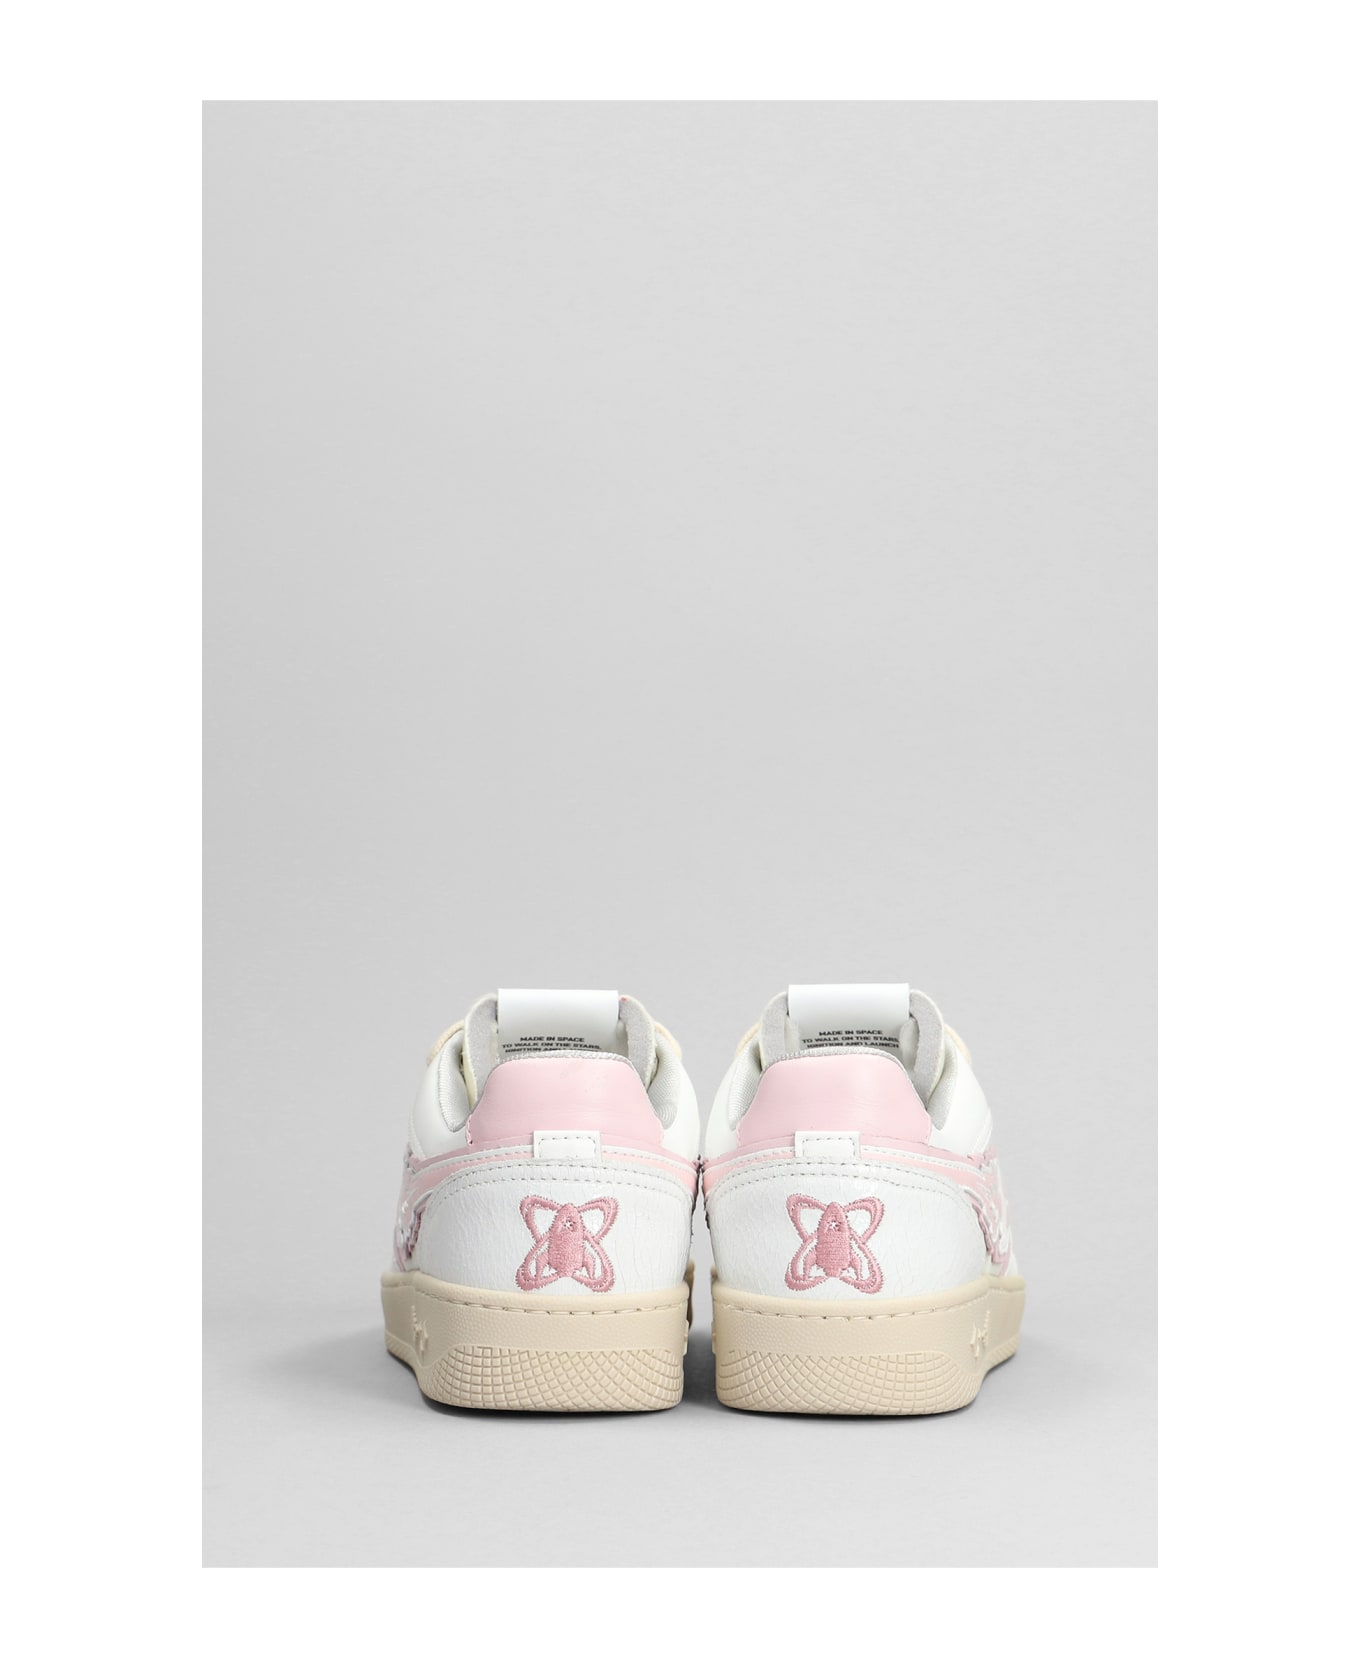 Enterprise Japan Sneakers In White Leather - White and pink